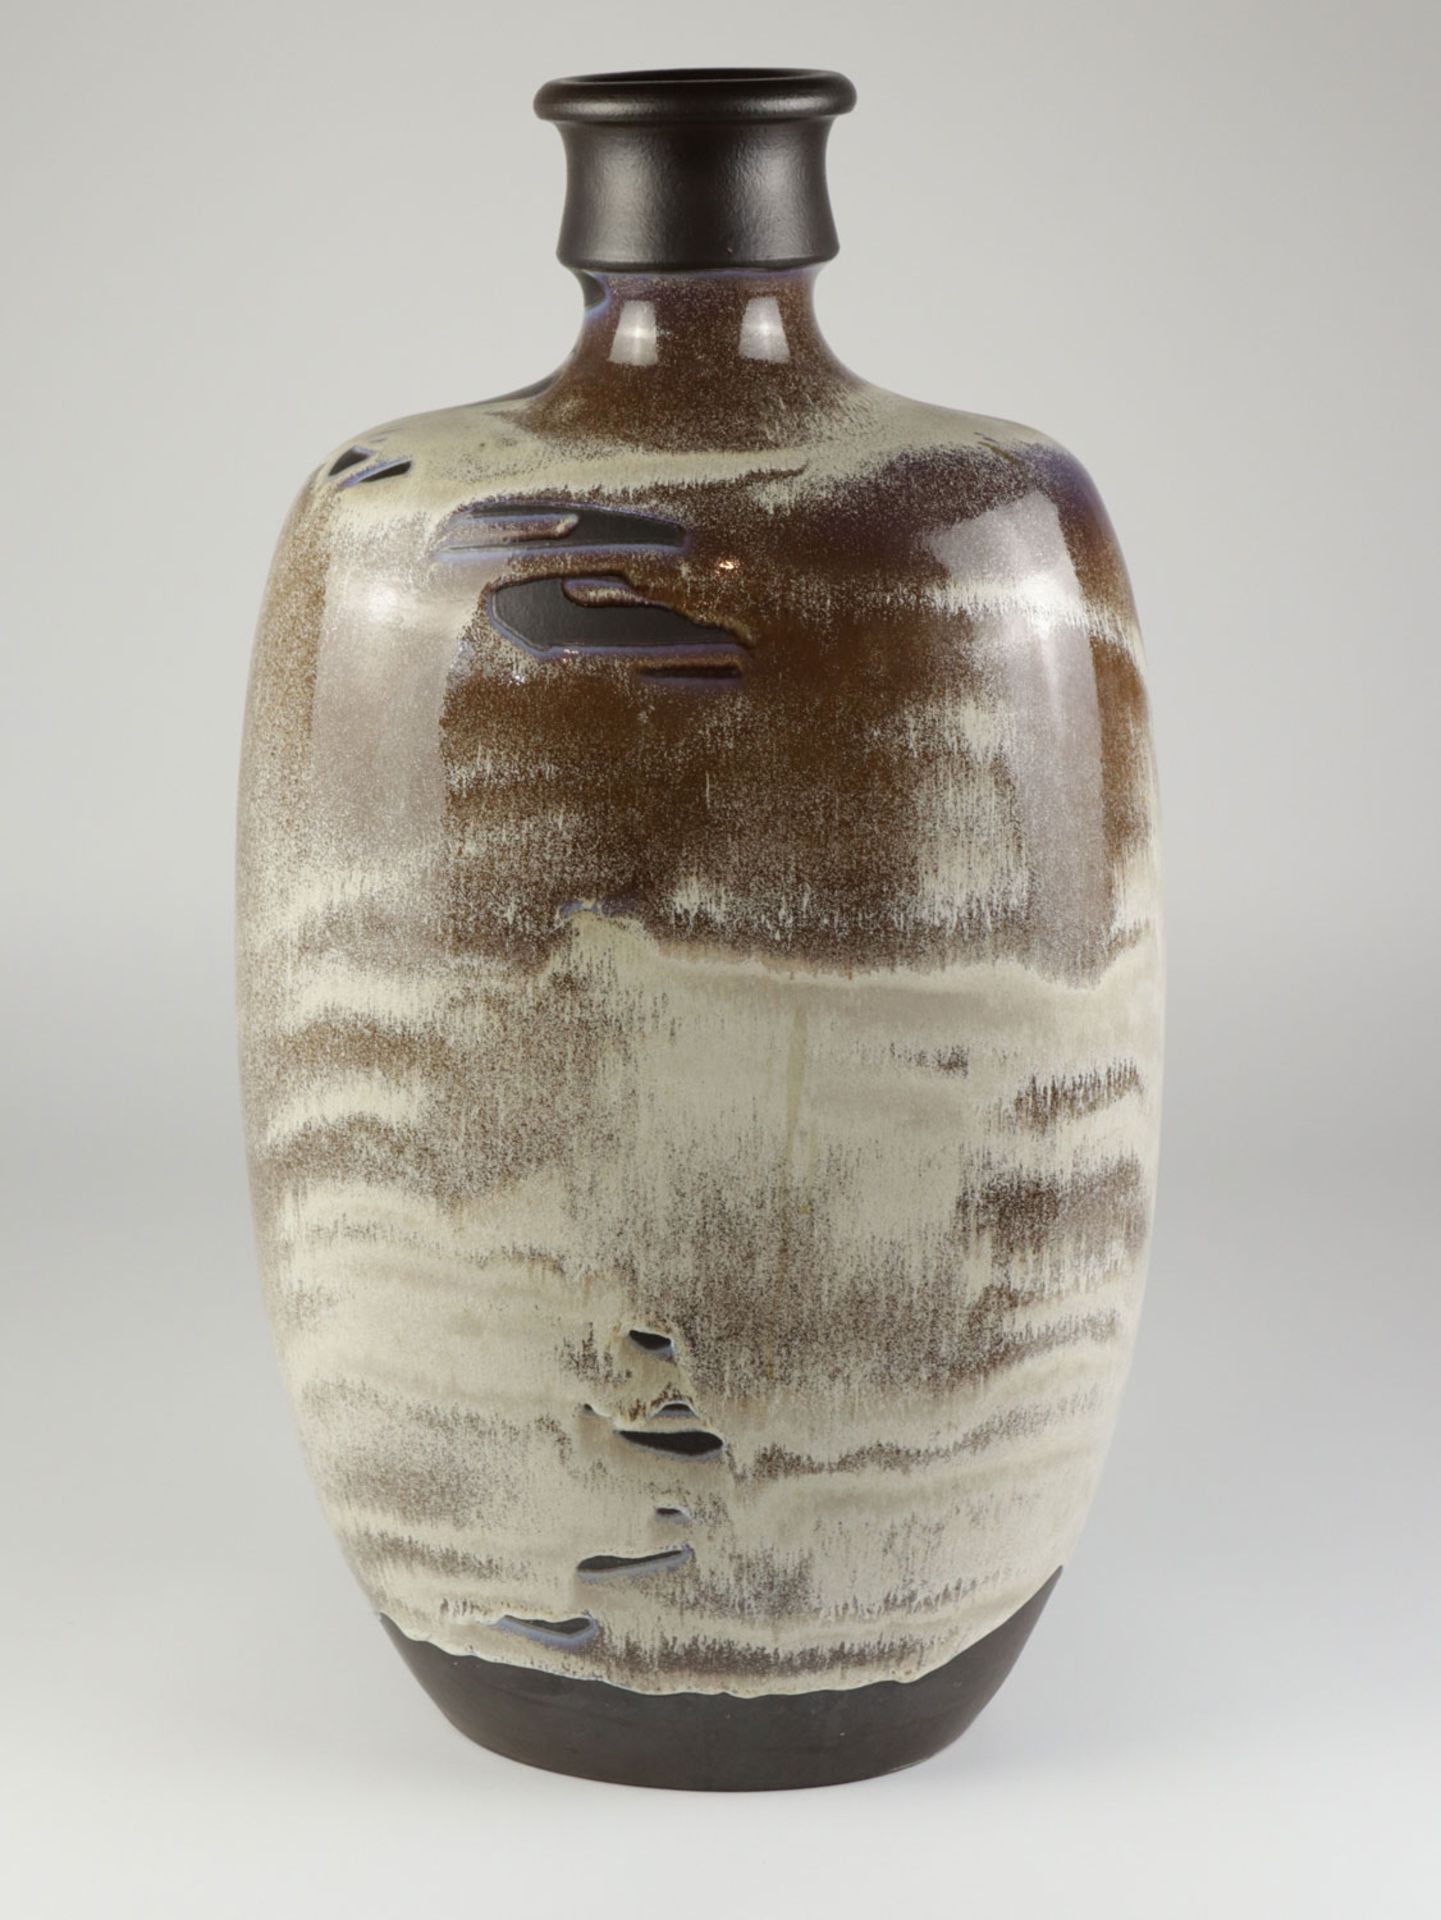 Kuch, Wilh. & Elly - Bodenvase - Image 5 of 7